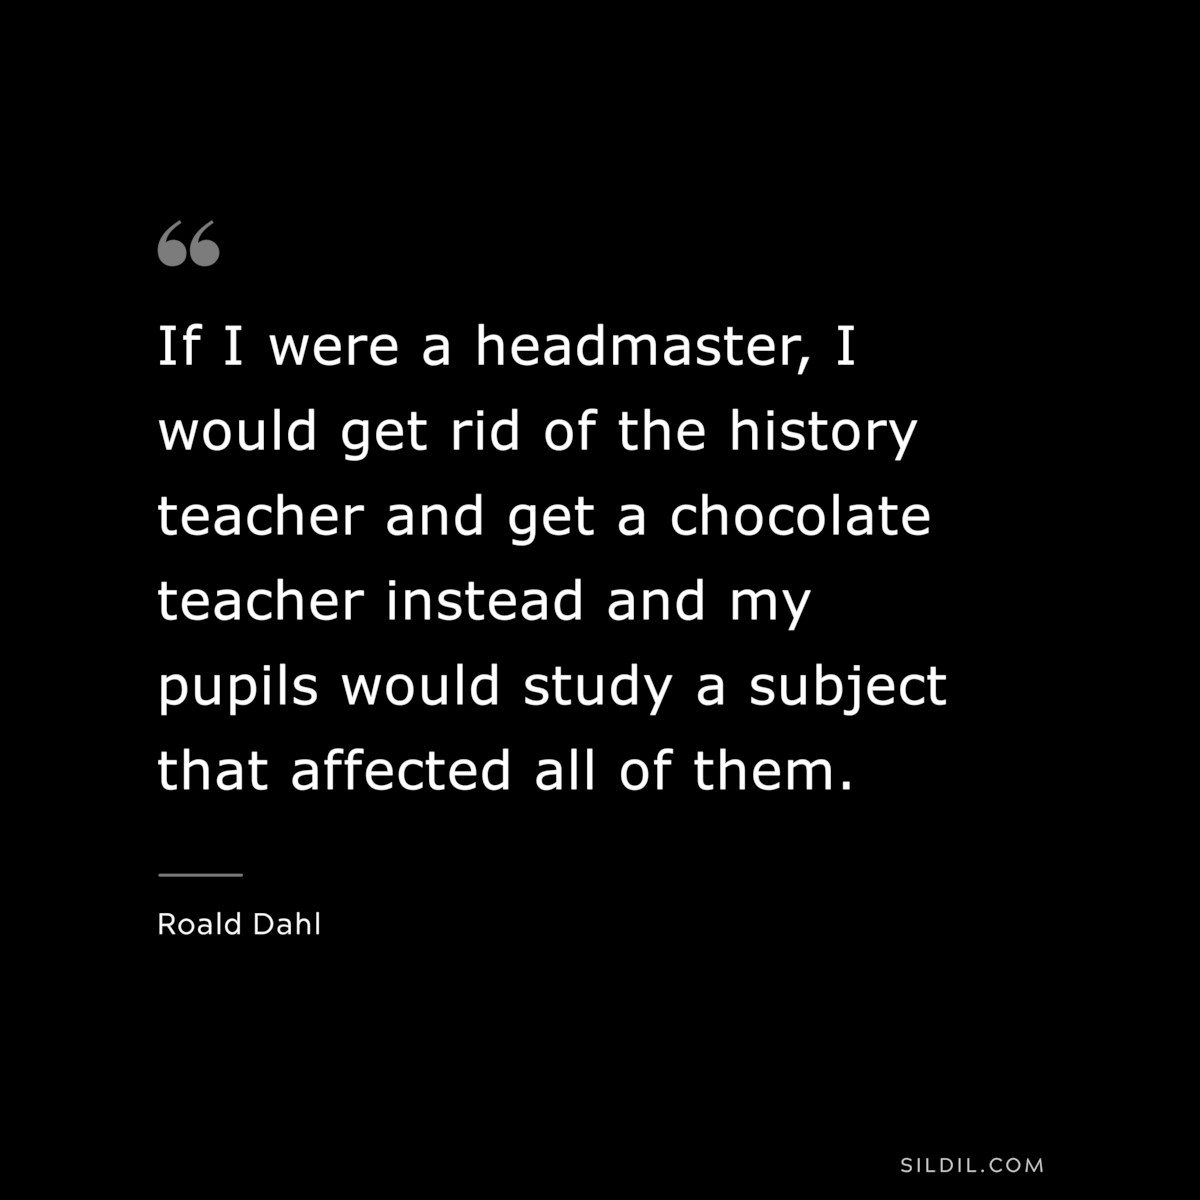 If I were a headmaster, I would get rid of the history teacher and get a chocolate teacher instead and my pupils would study a subject that affected all of them. ― Roald Dahl